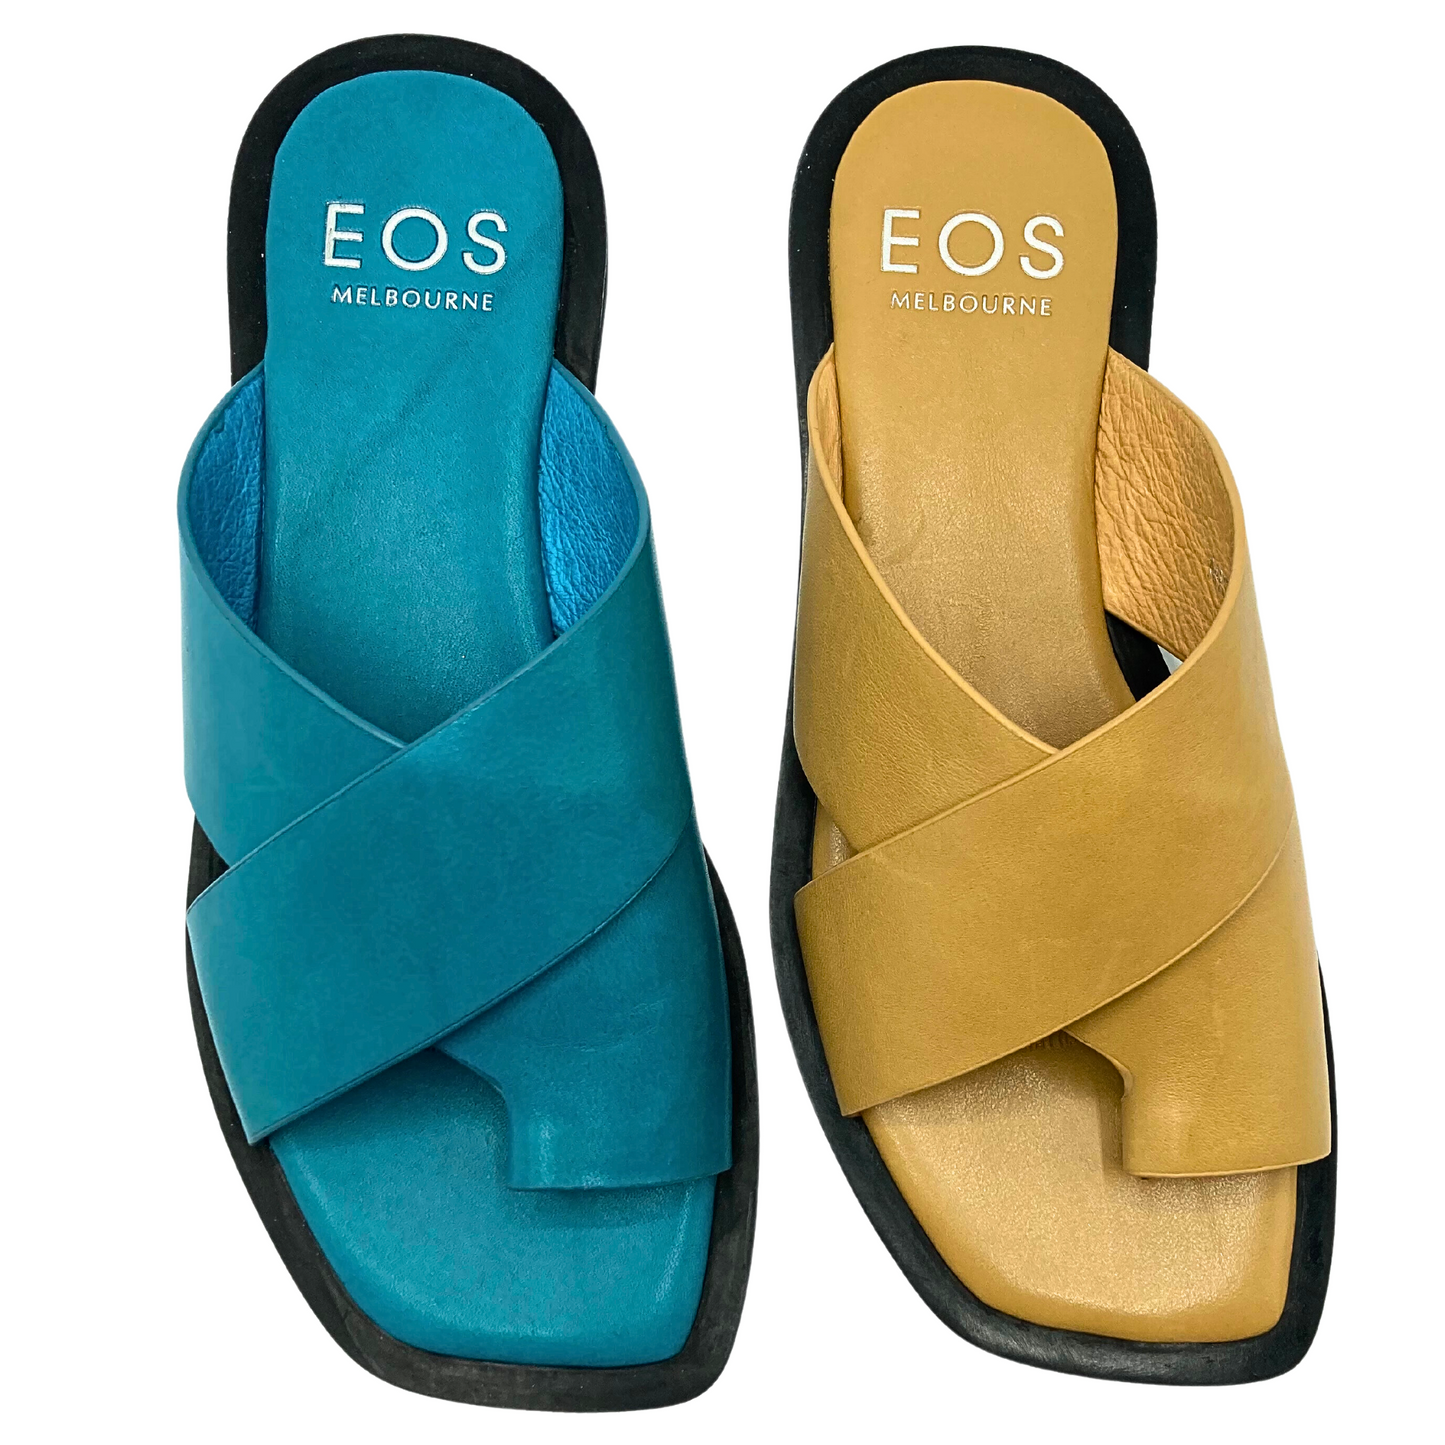 Top down view of slip on flat sandals in a blue and golden /tan